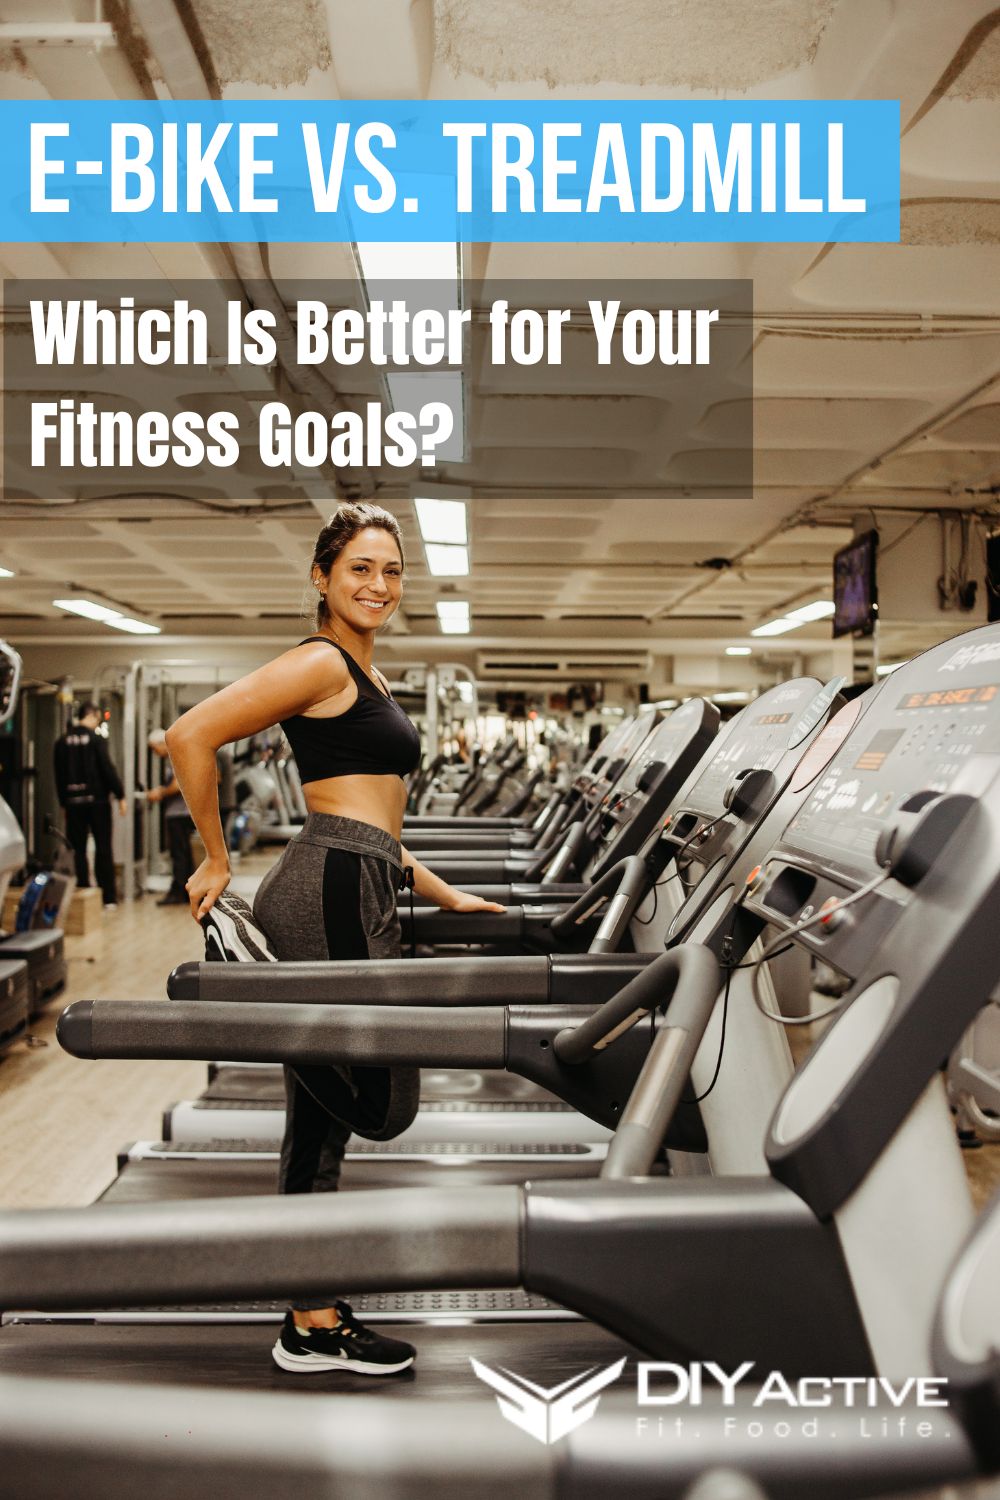 E-Bike vs. Treadmill: Which Is Better for Your Fitness Goals?